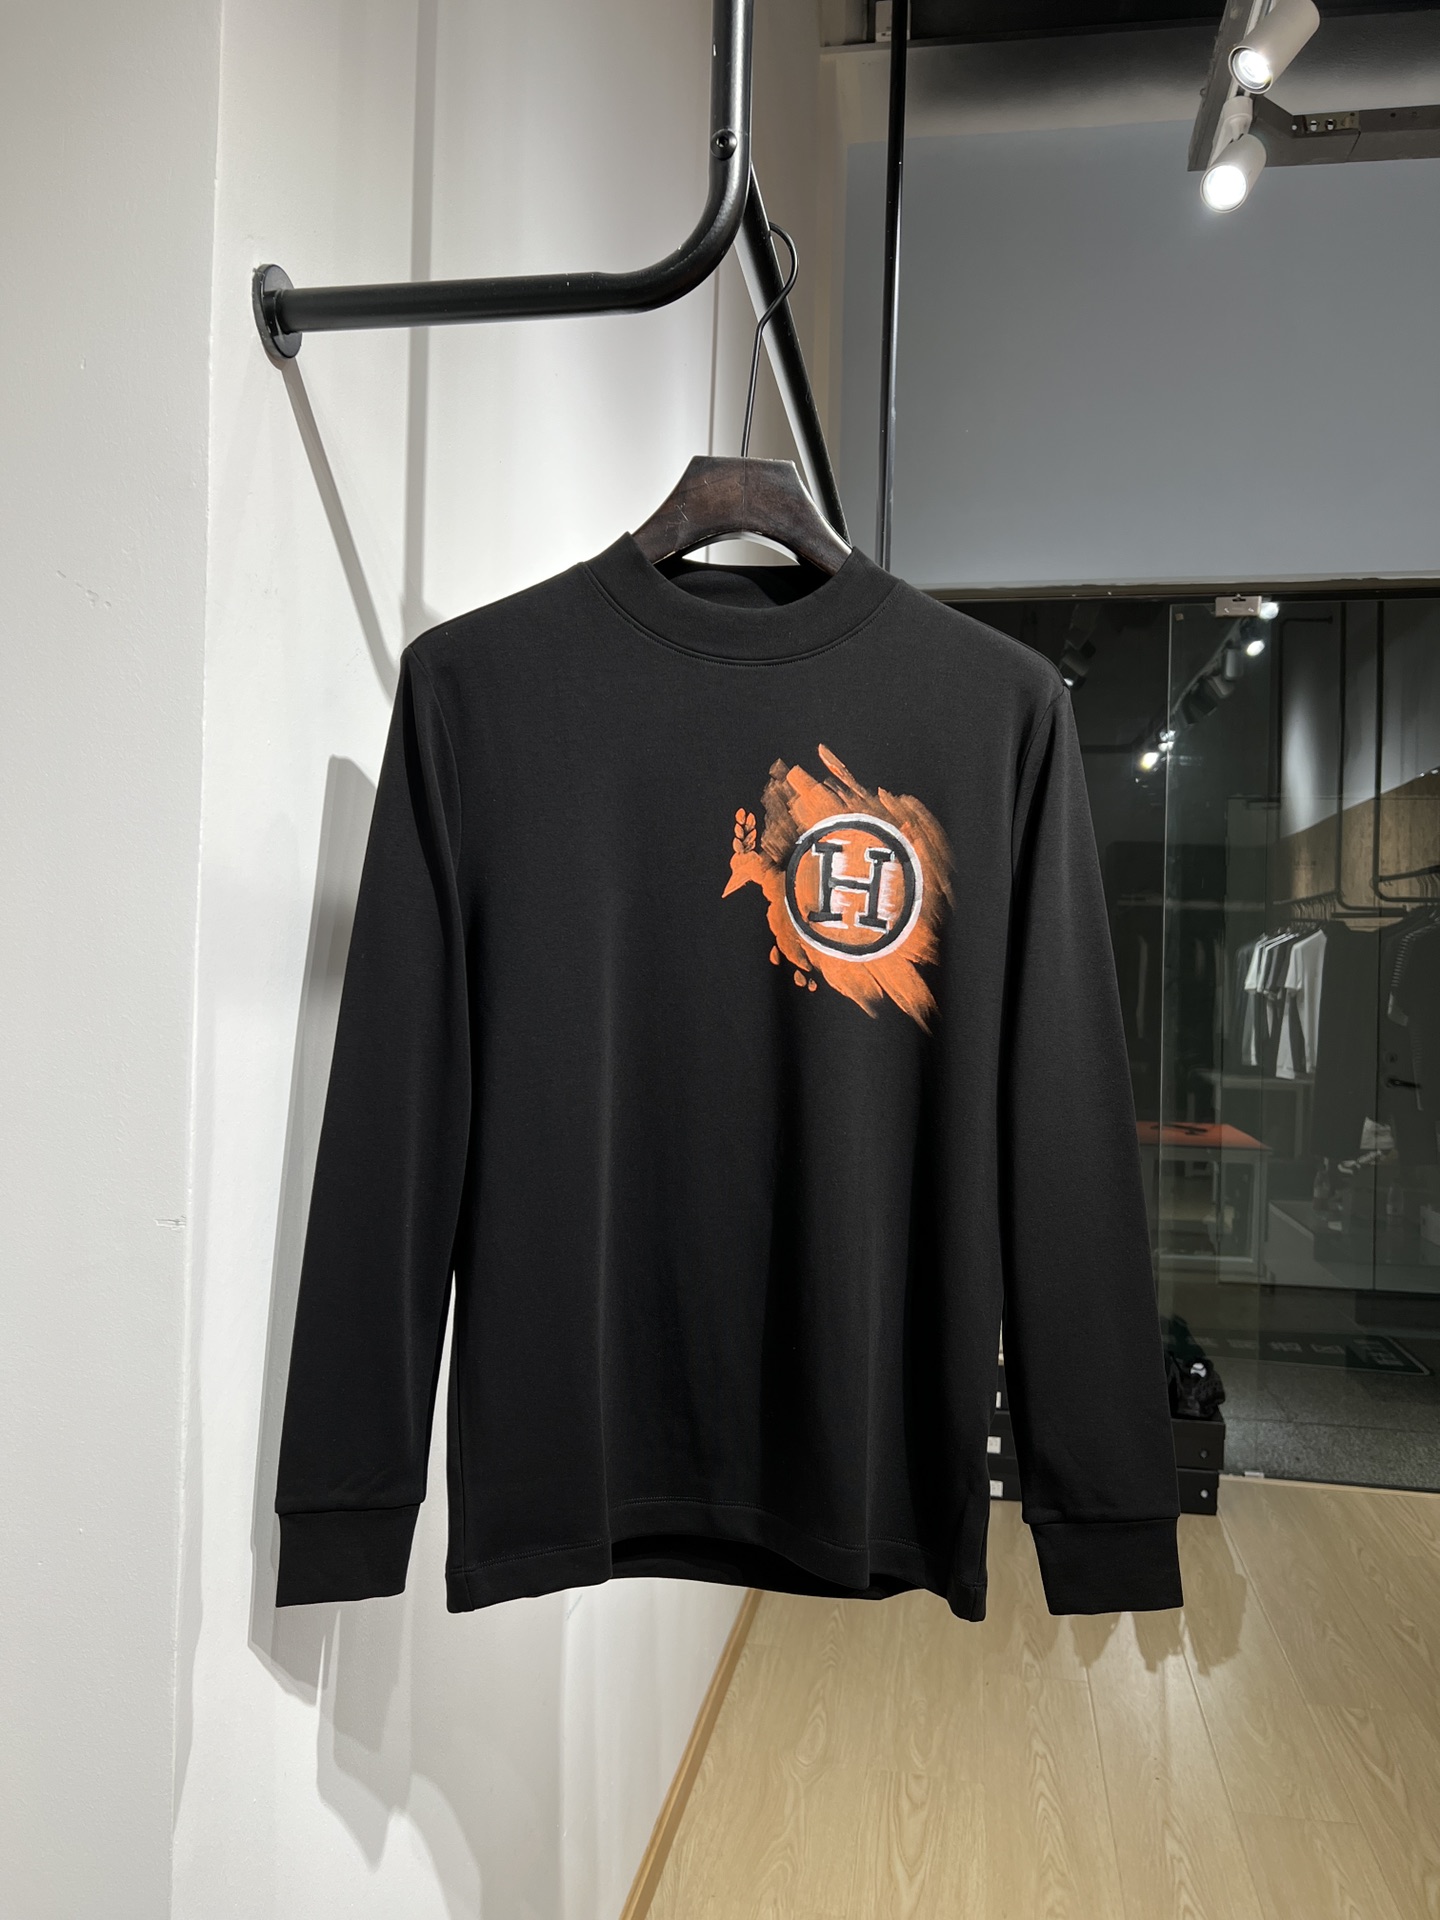 Buy 1:1
 Hermes Clothing T-Shirt Black Printing Unisex Cotton Knitted Knitting Fall/Winter Collection Vintage Long Sleeve